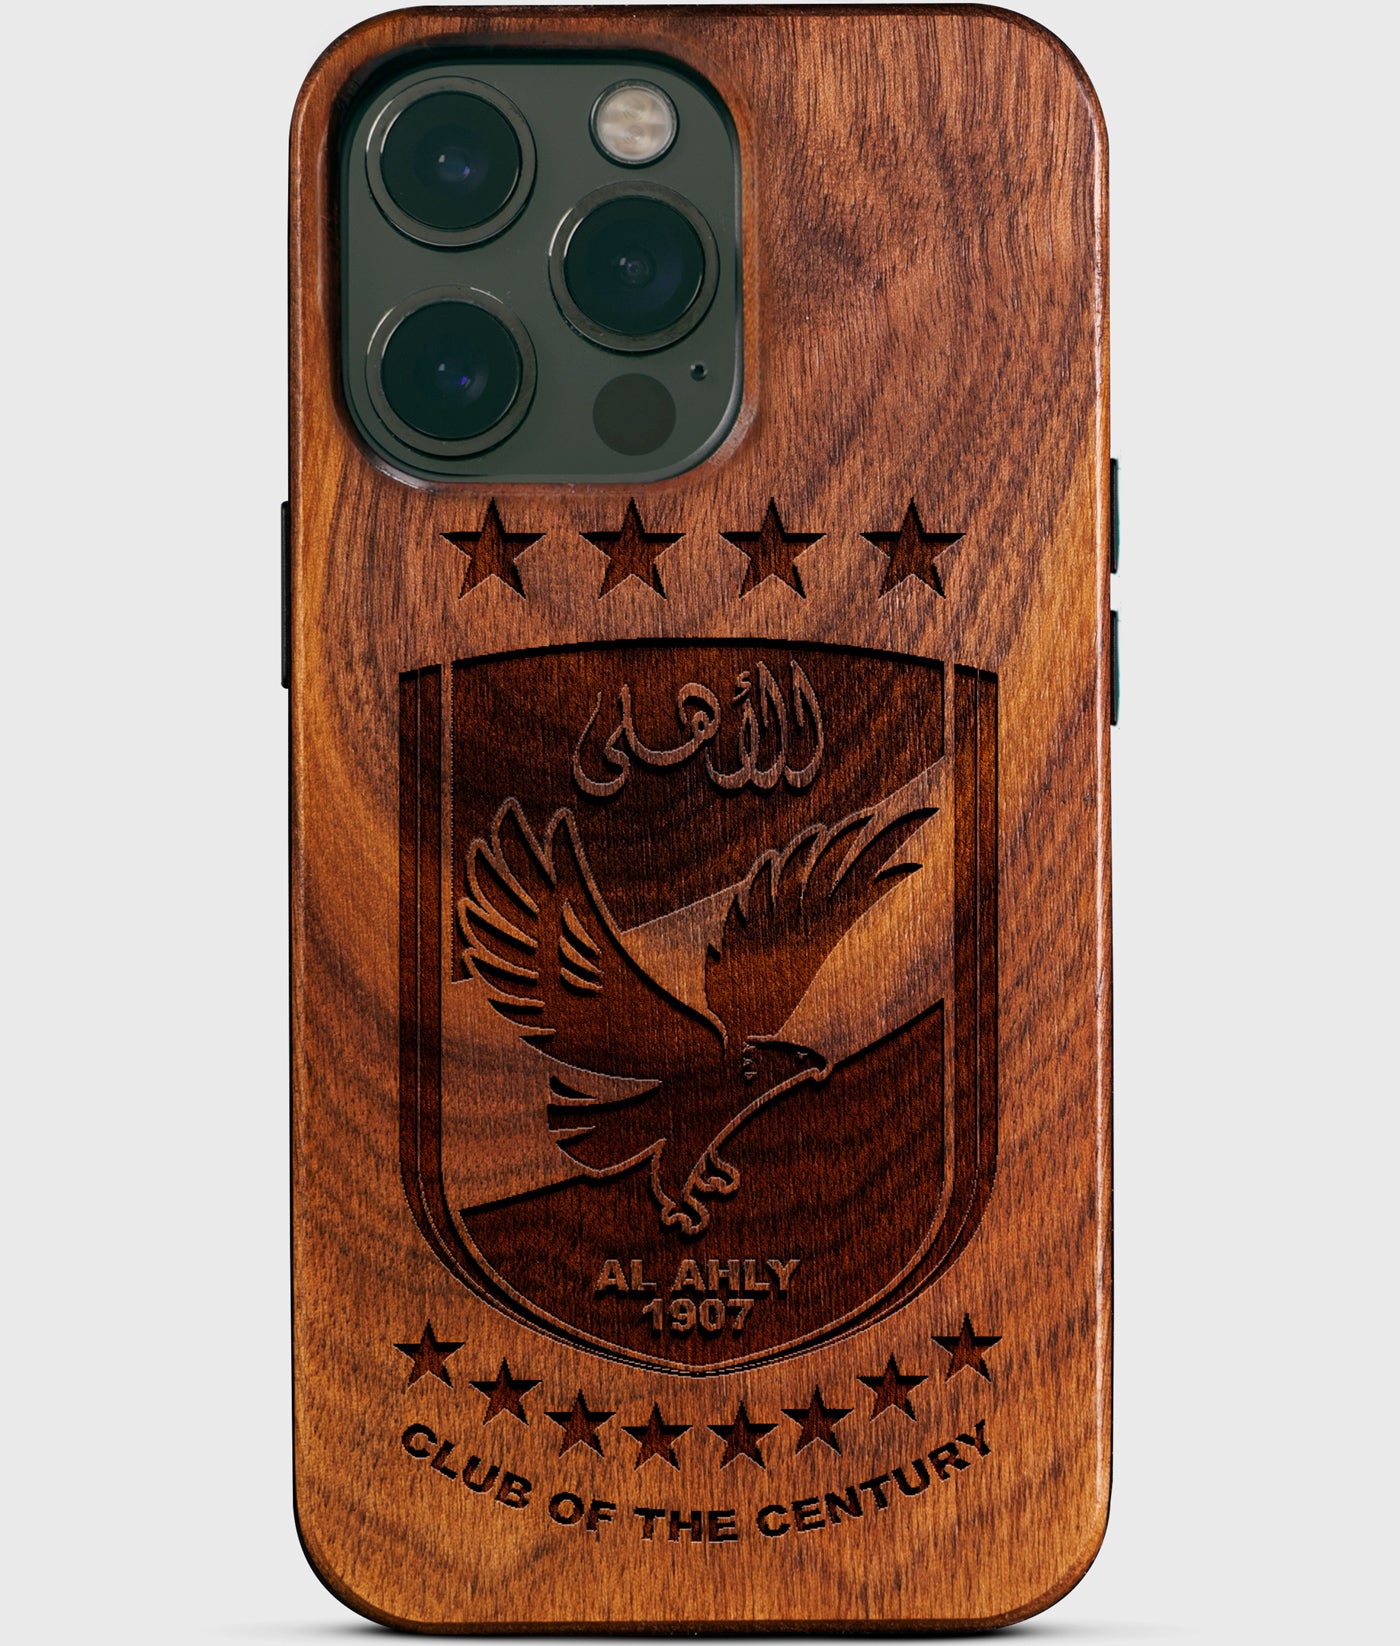 Custom Al Ahly SC Iphone 14 Pro Max Cases Al Ahly SC Personalized الاهلي Egyptian Football Club Cairo Gifts For Men 2022 Best Egyptian Christmas Gifts Carved Wood Unusual Al Ahly SC Gift For Him Monogrammed